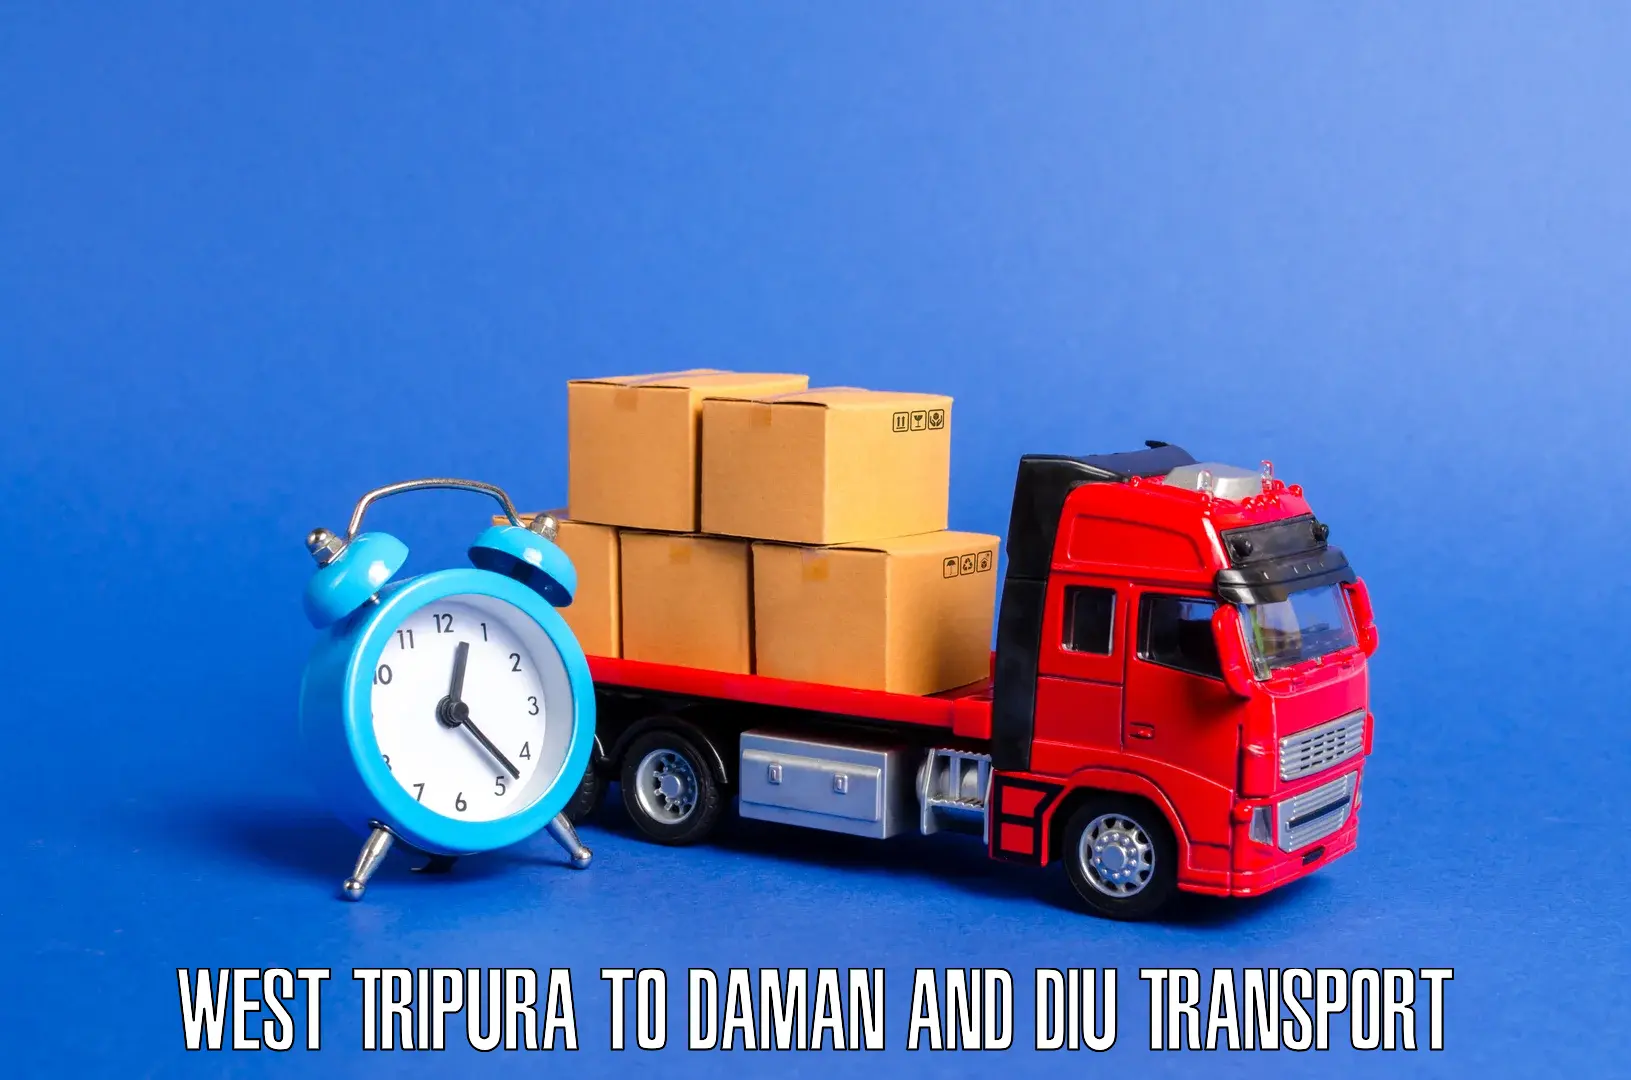 Daily parcel service transport West Tripura to Daman and Diu